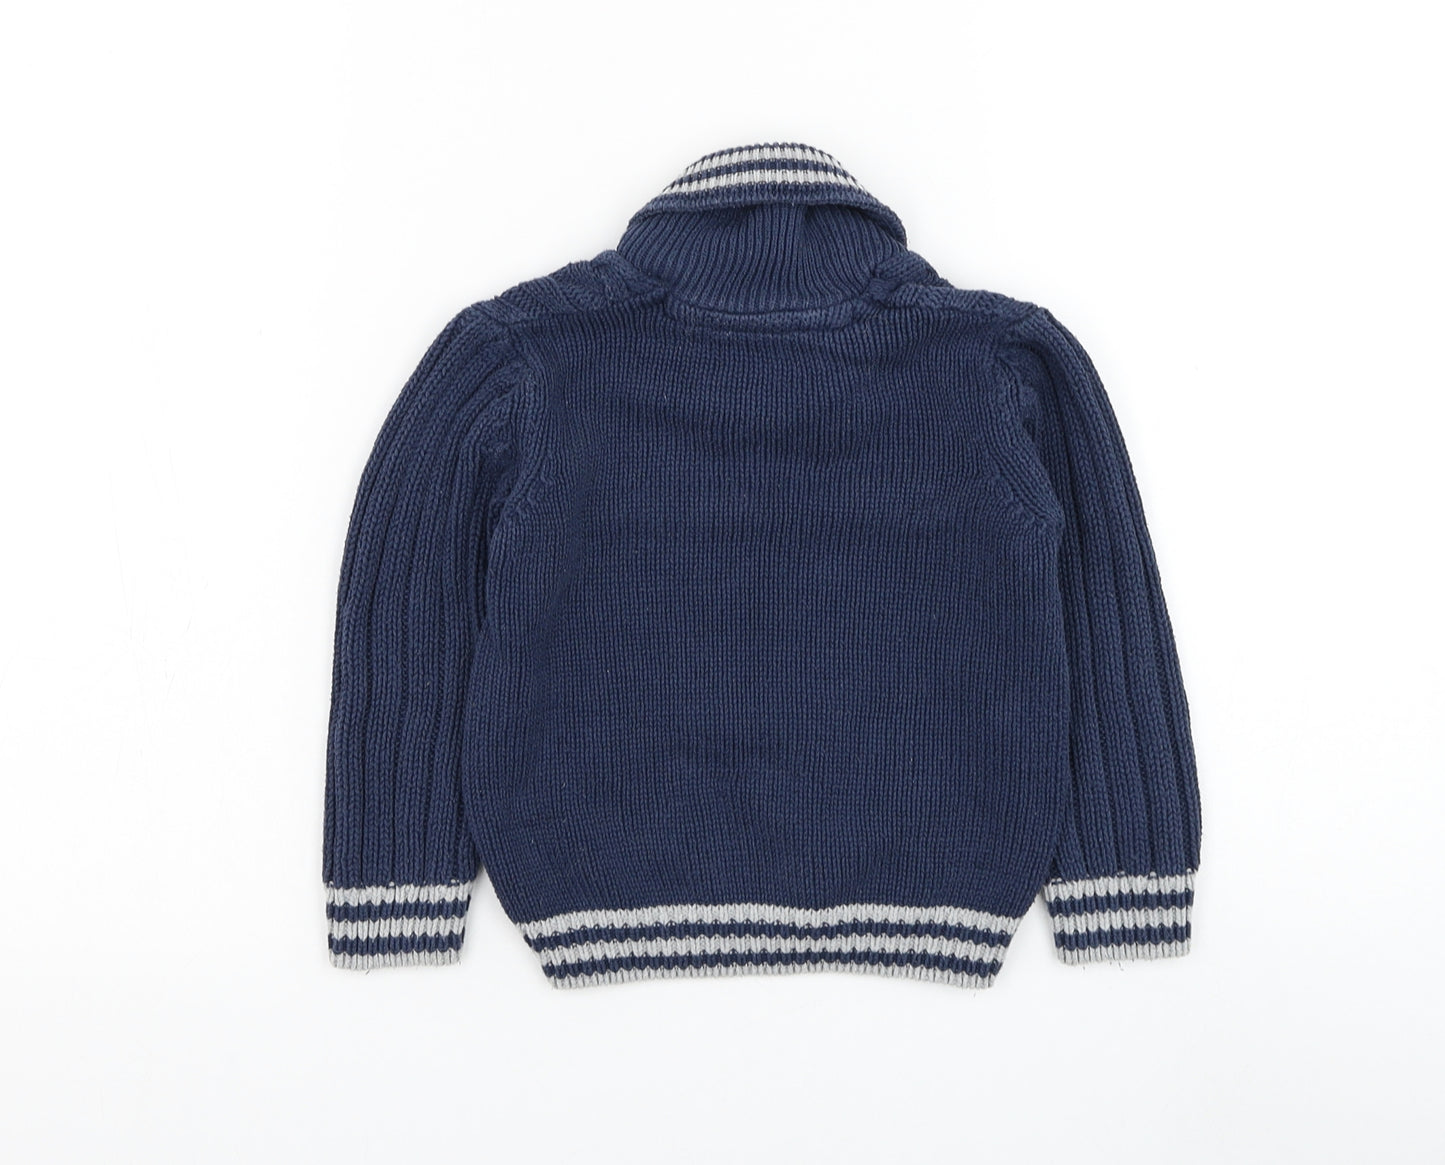 Matalan Boys Blue Roll Neck Cotton Pullover Jumper Size 2-3 Years Pullover